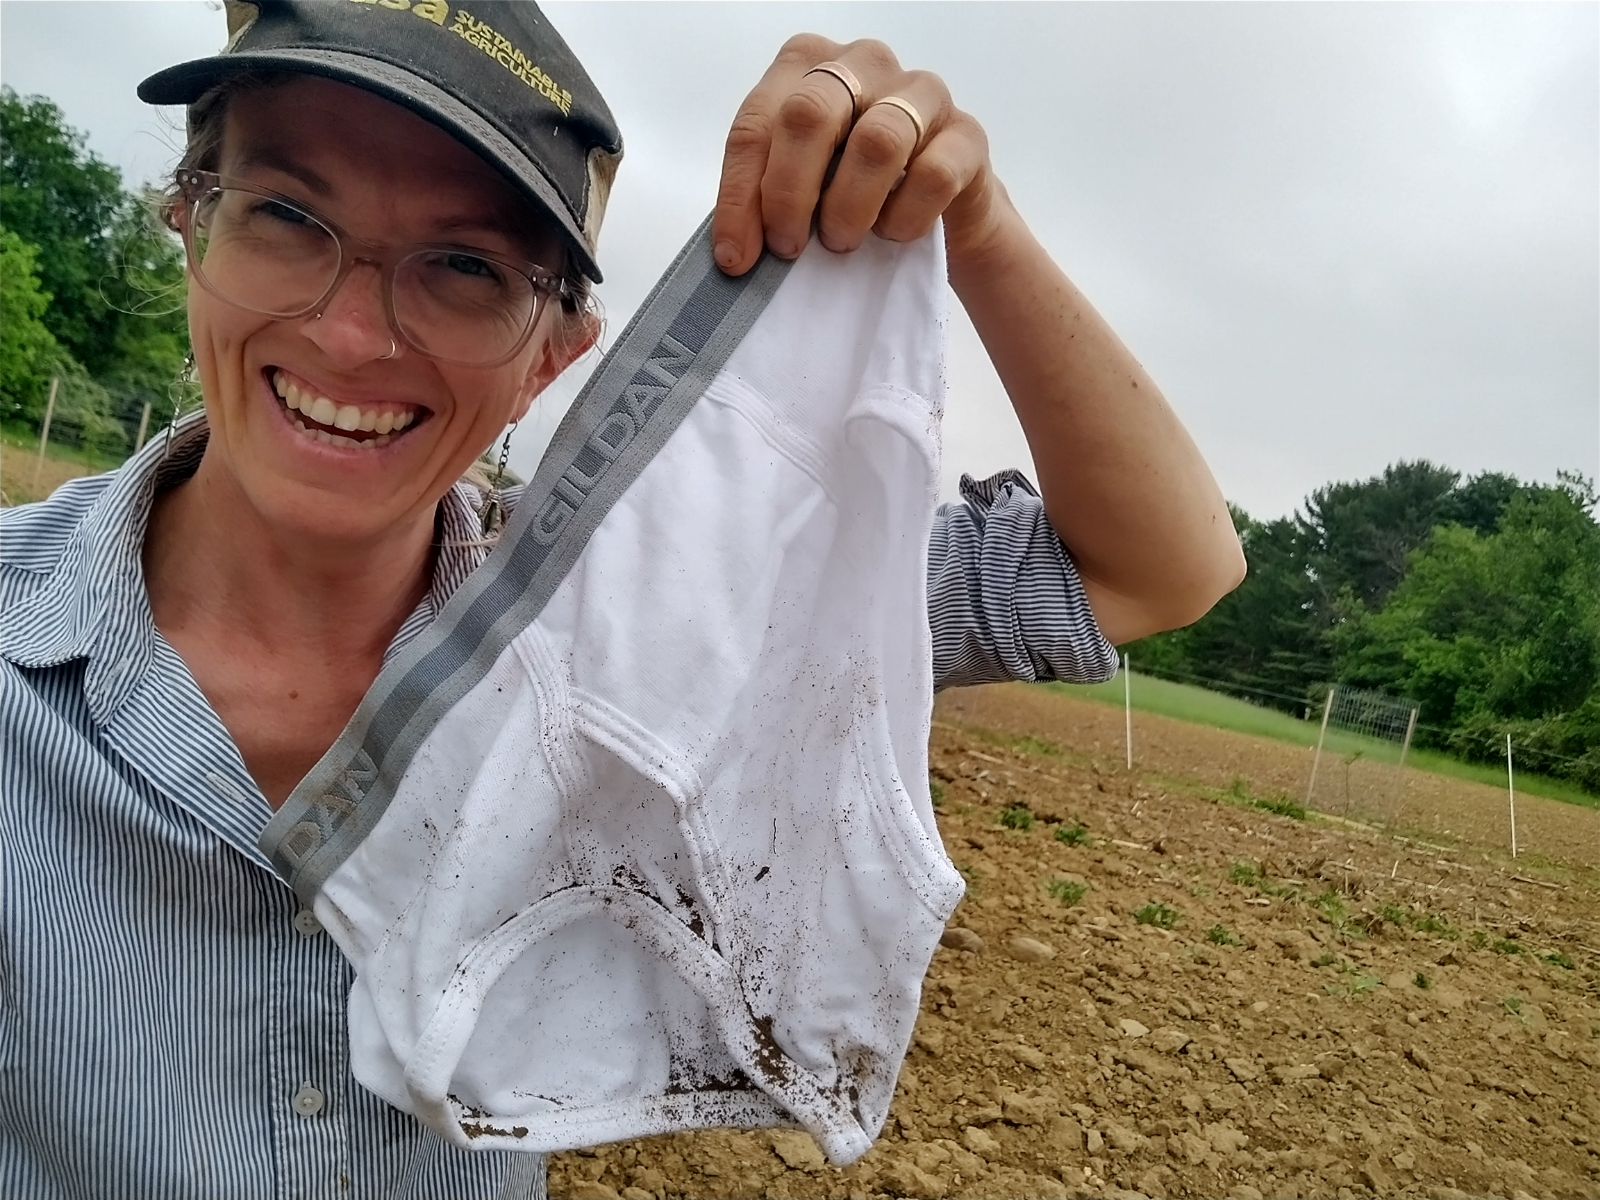 Farmers unveil underwear results from 'Soil Your Undies Challenge' - 47abc